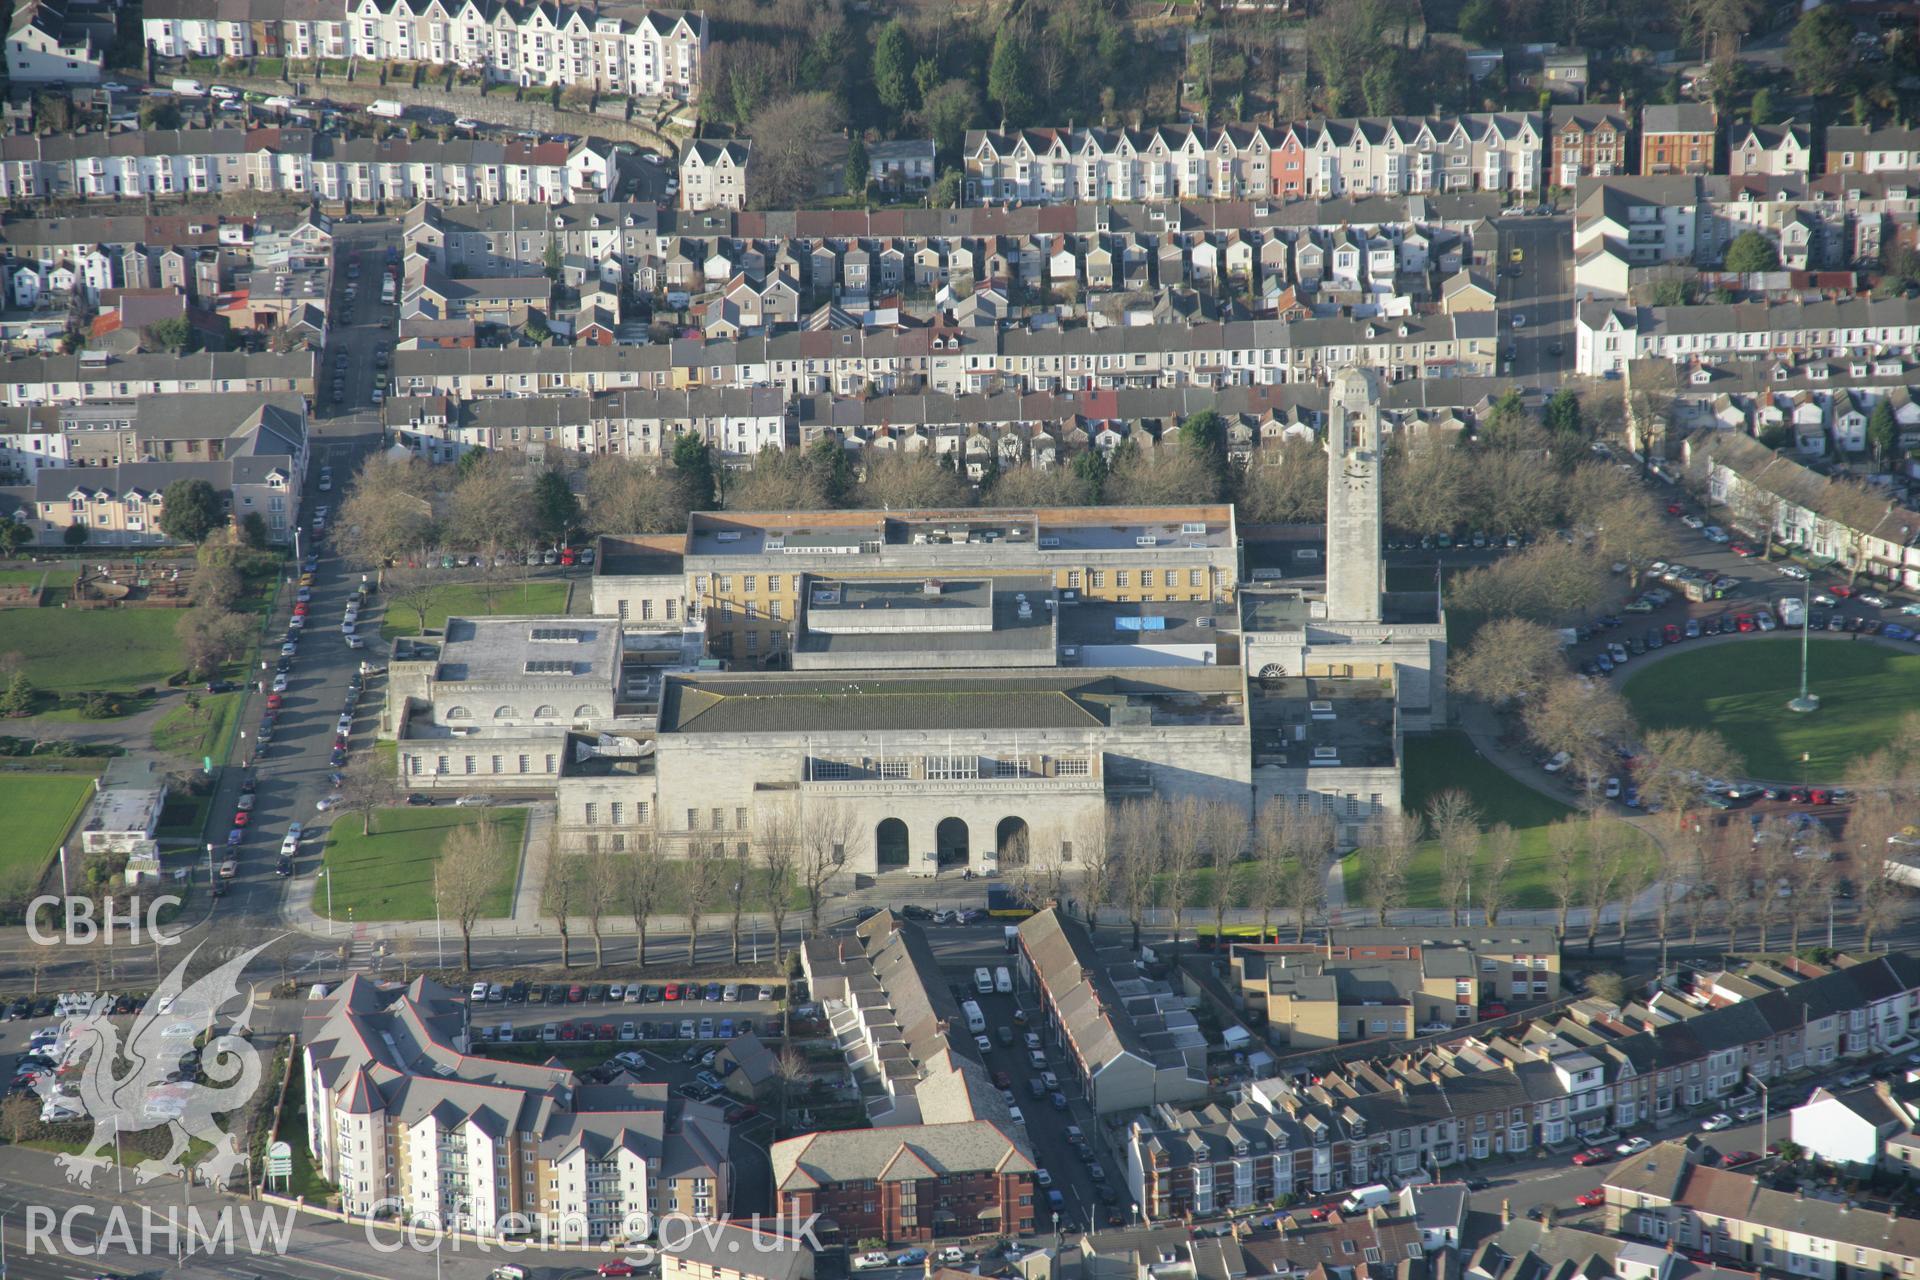 RCAHMW colour oblique aerial photograph of Guildhall, Swansea, from the south-east. Taken on 26 January 2006 by Toby Driver.